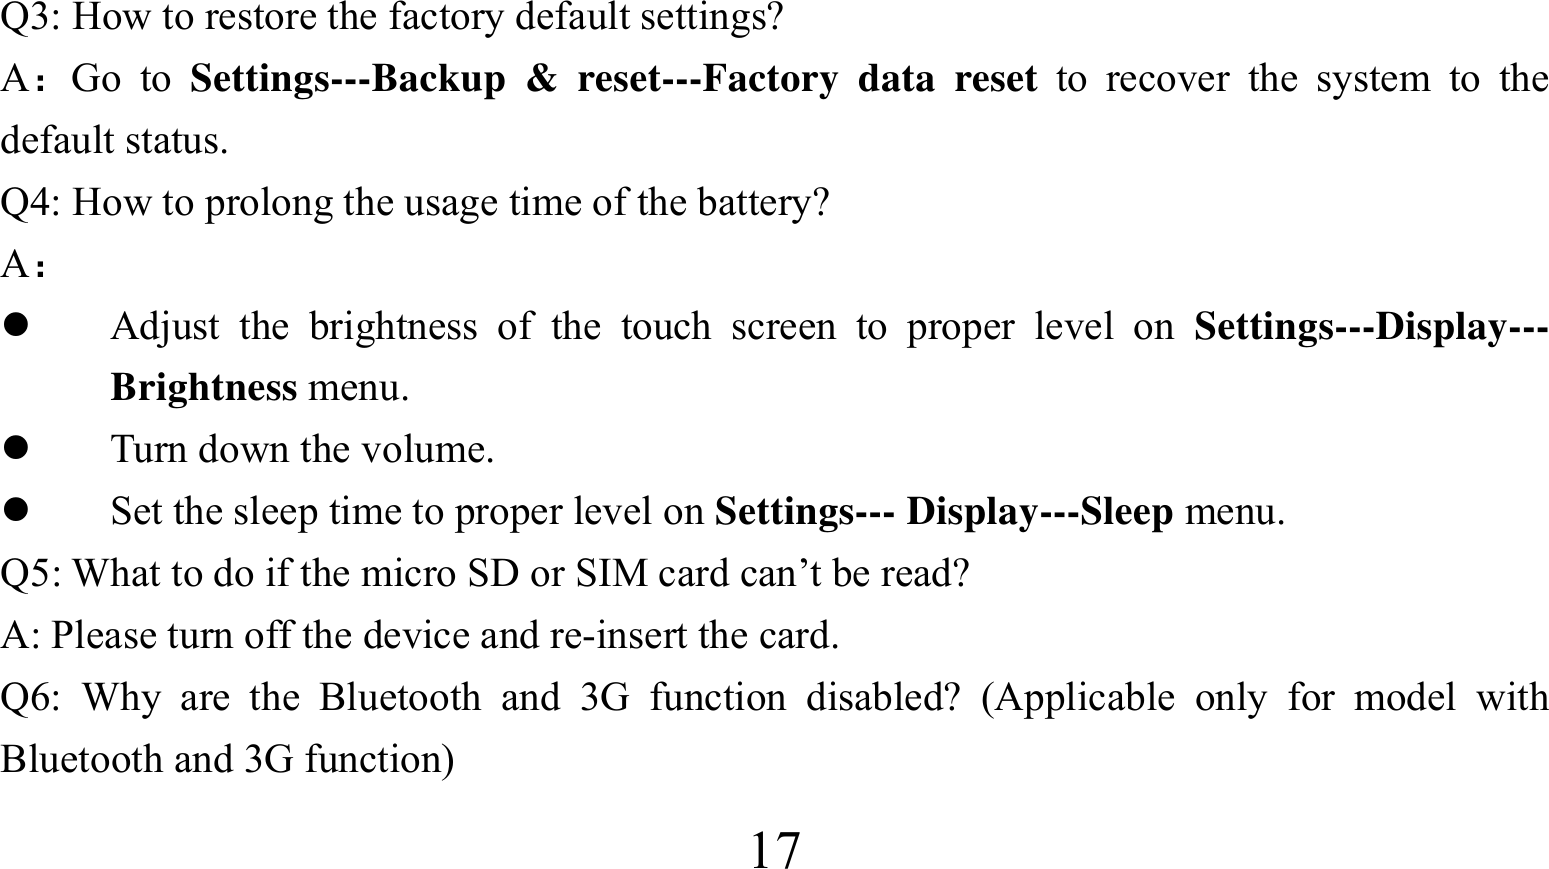  17Q3: How to restore the factory default settings? A：Go to Settings---Backup &amp; reset---Factory data reset to recover the system to the default status. Q4: How to prolong the usage time of the battery? A：  Adjust the brightness of the touch screen to proper level on Settings---Display--- Brightness menu.  Turn down the volume.  Set the sleep time to proper level on Settings--- Display---Sleep menu. Q5: What to do if the micro SD or SIM card can’t be read? A: Please turn off the device and re-insert the card. Q6: Why are the Bluetooth and 3G function disabled? (Applicable only for model with Bluetooth and 3G function)   